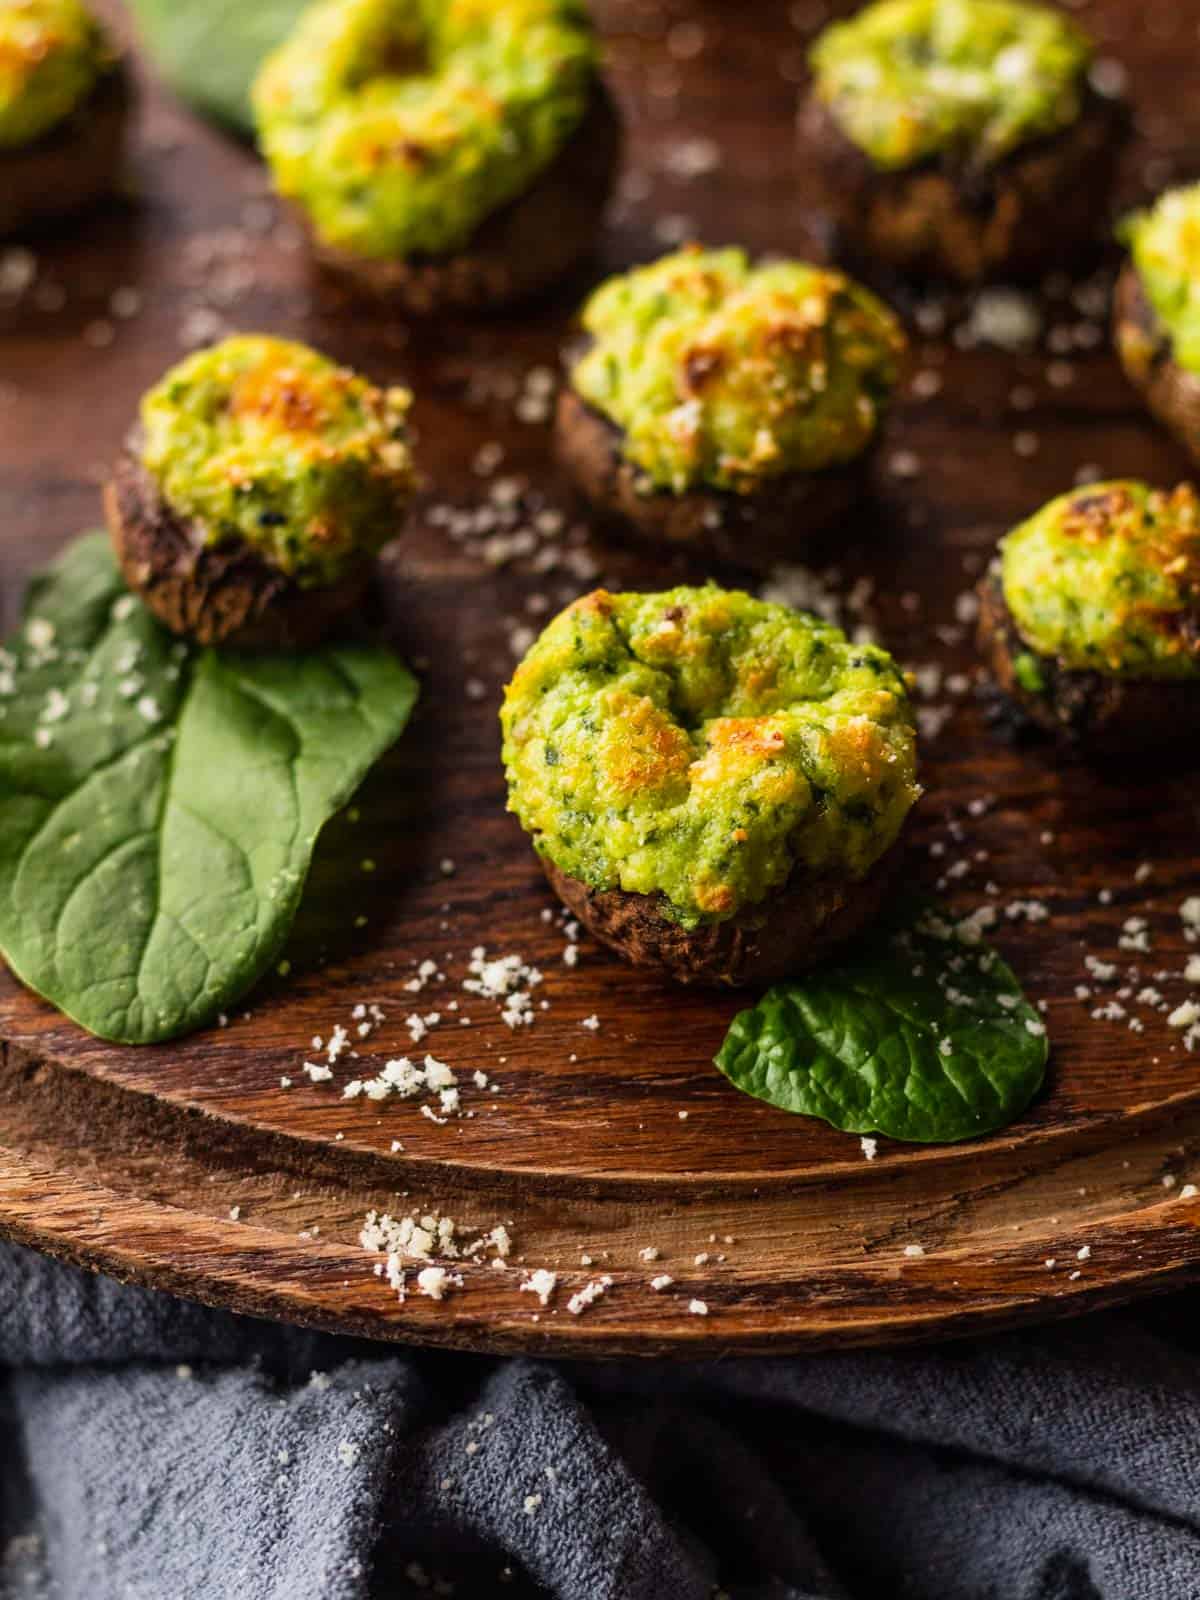 Spinach and ricotta stuffed mushrooms on a round wooden serving tray.